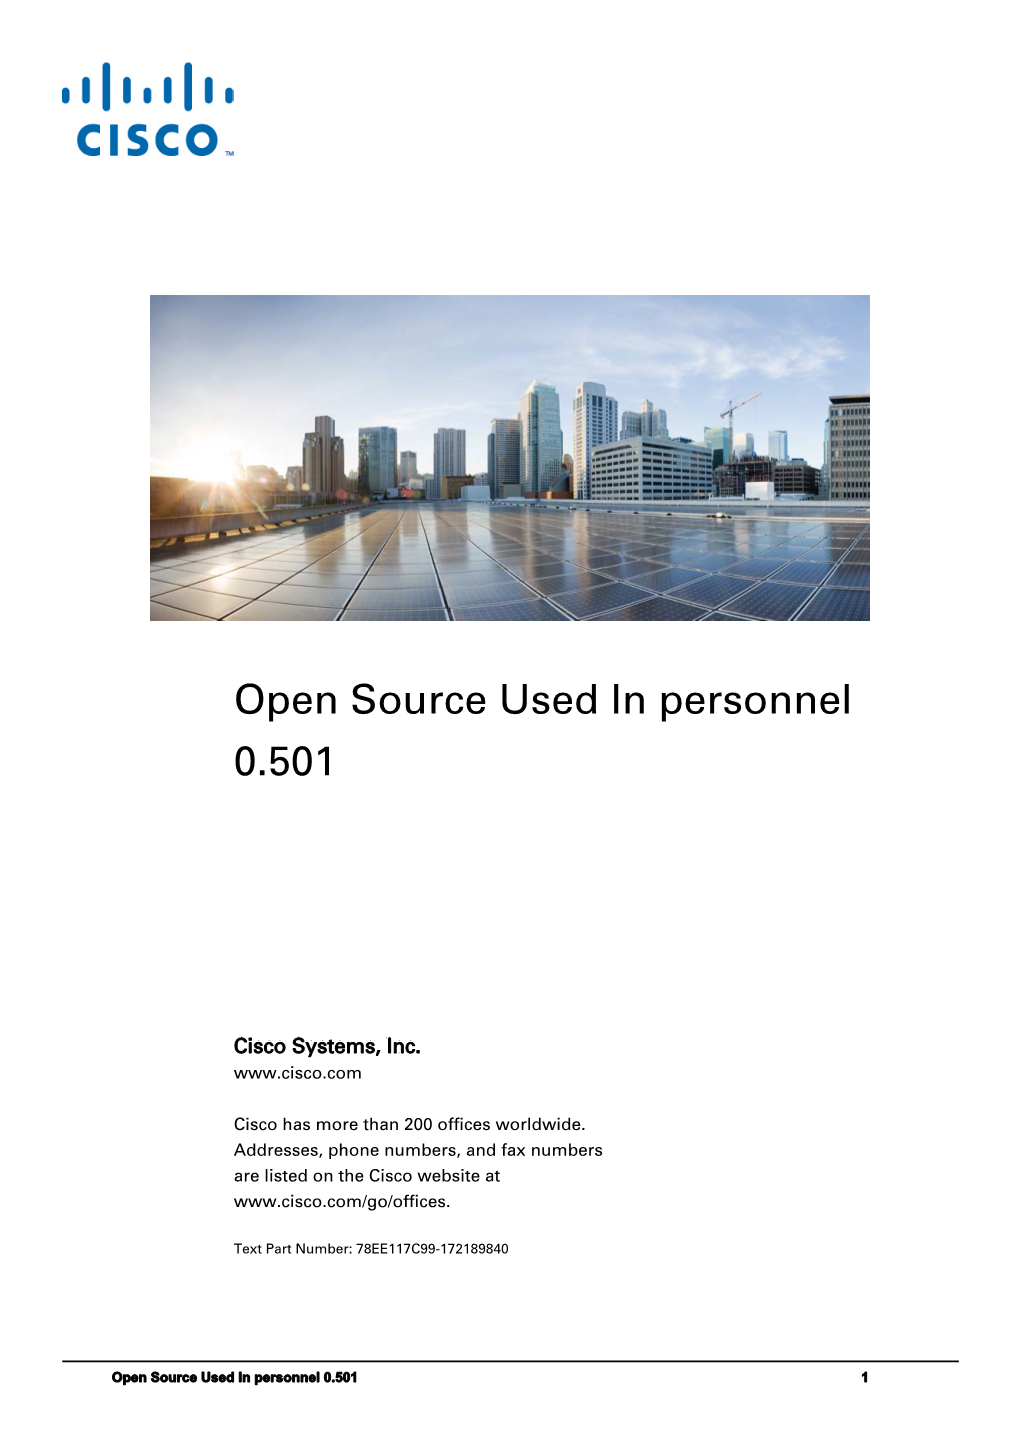 Open Source Used in Personnel 0.501